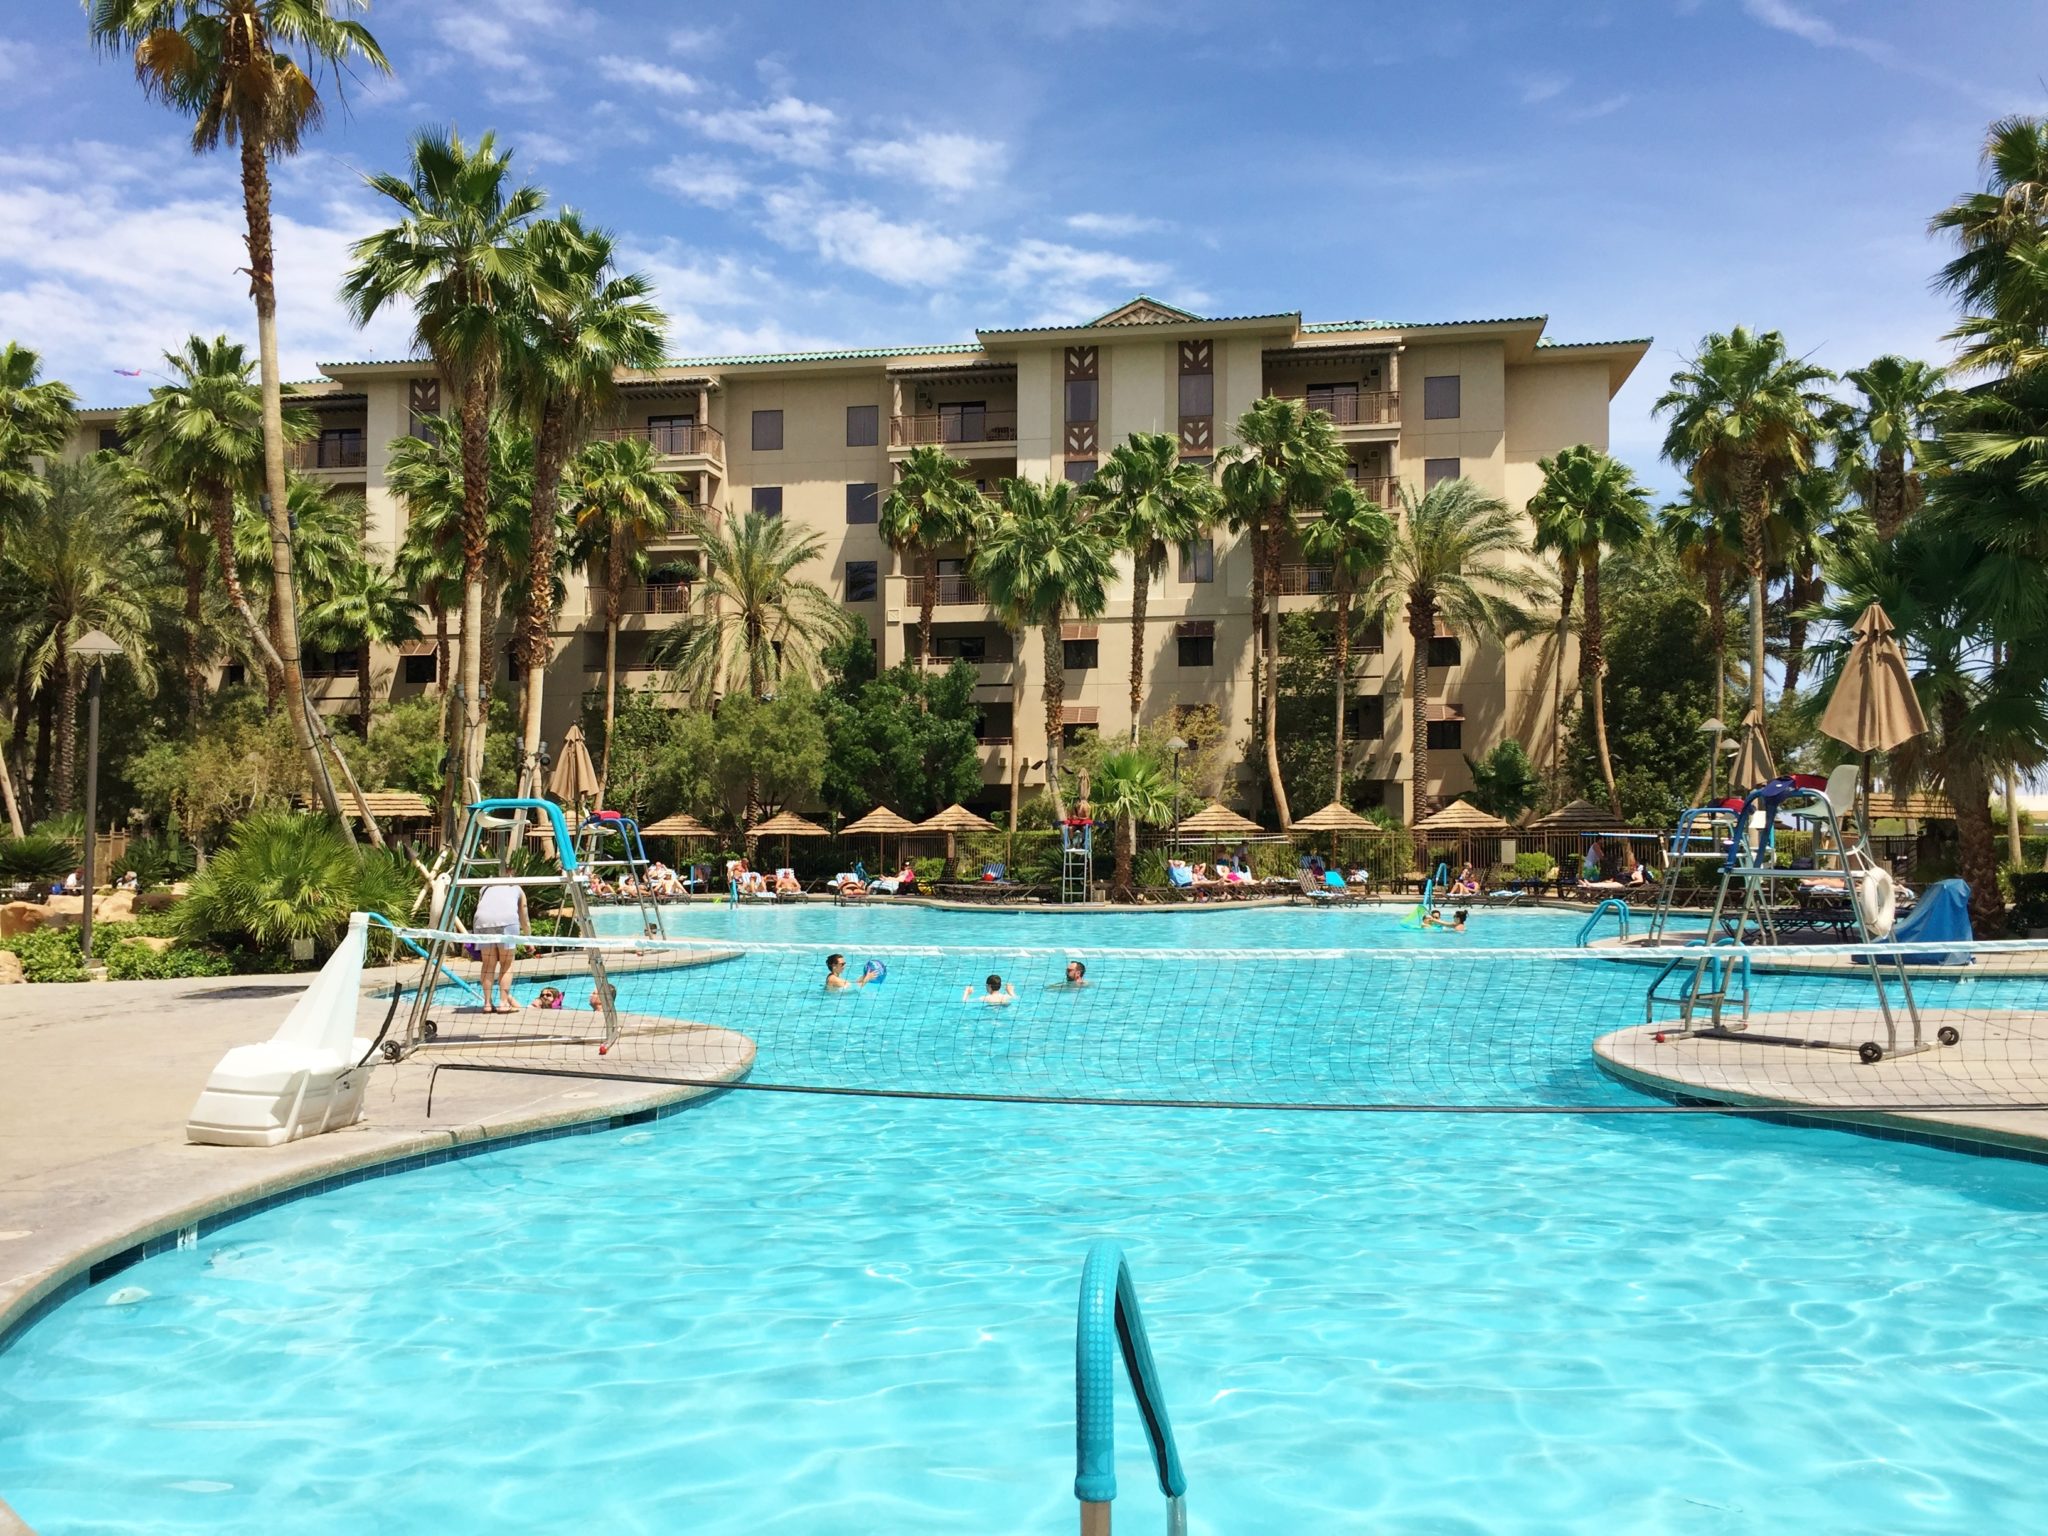 Review Tahiti Village Las Vegas…. Tahiti Village is our favourite place to stay in Las Vegas! Here’s my top 5 reasons why we love to […]